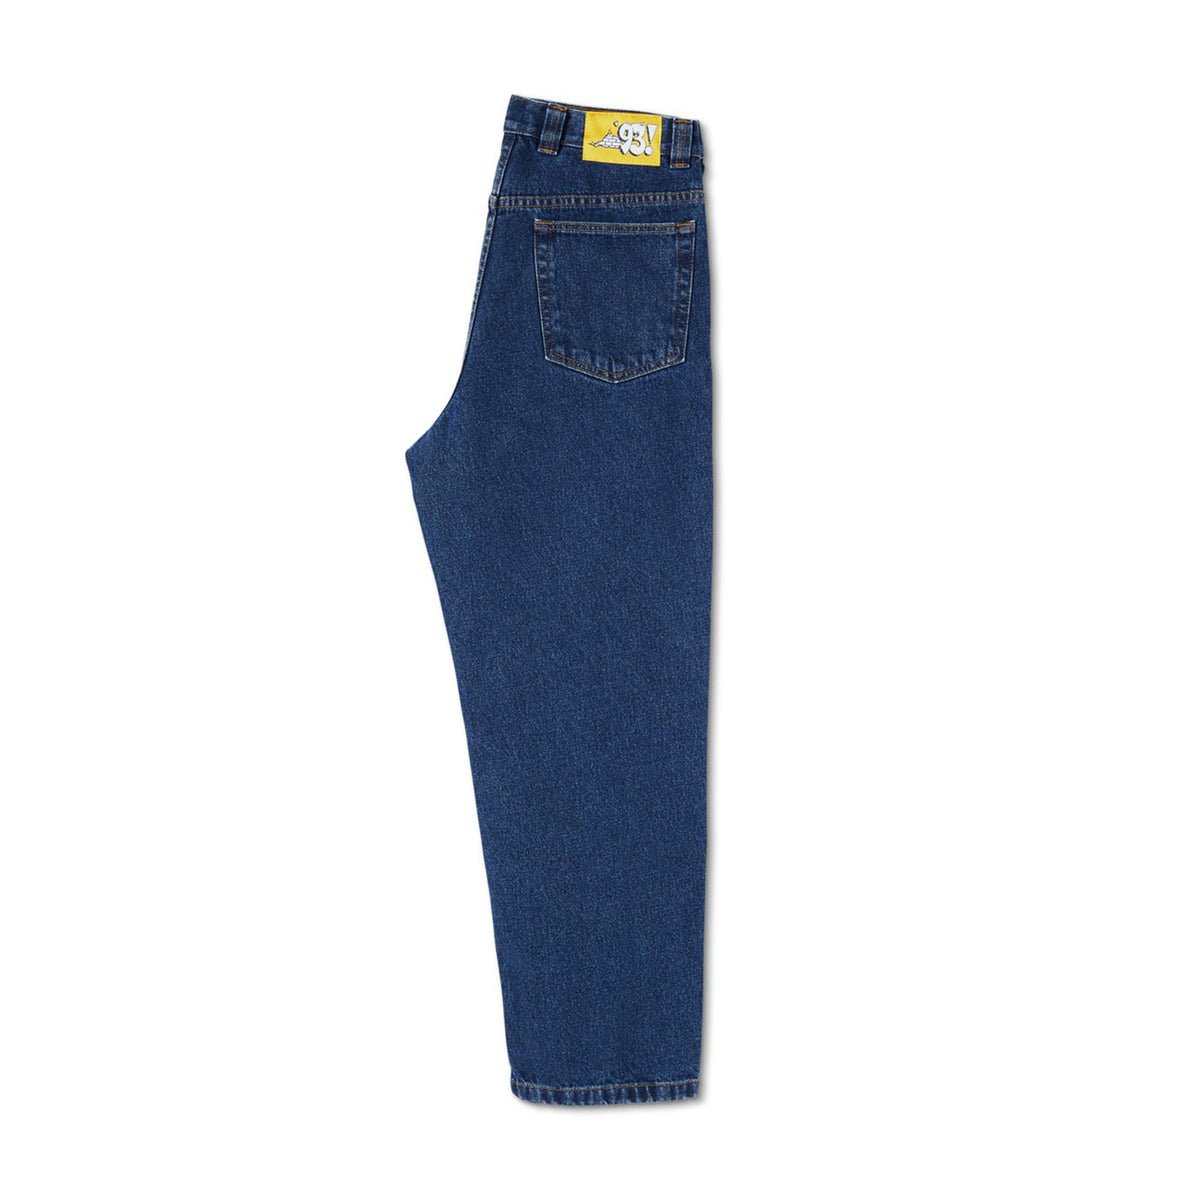 Explore 93 Denim Jeans Polar Skate Co and other. Shop in our shop